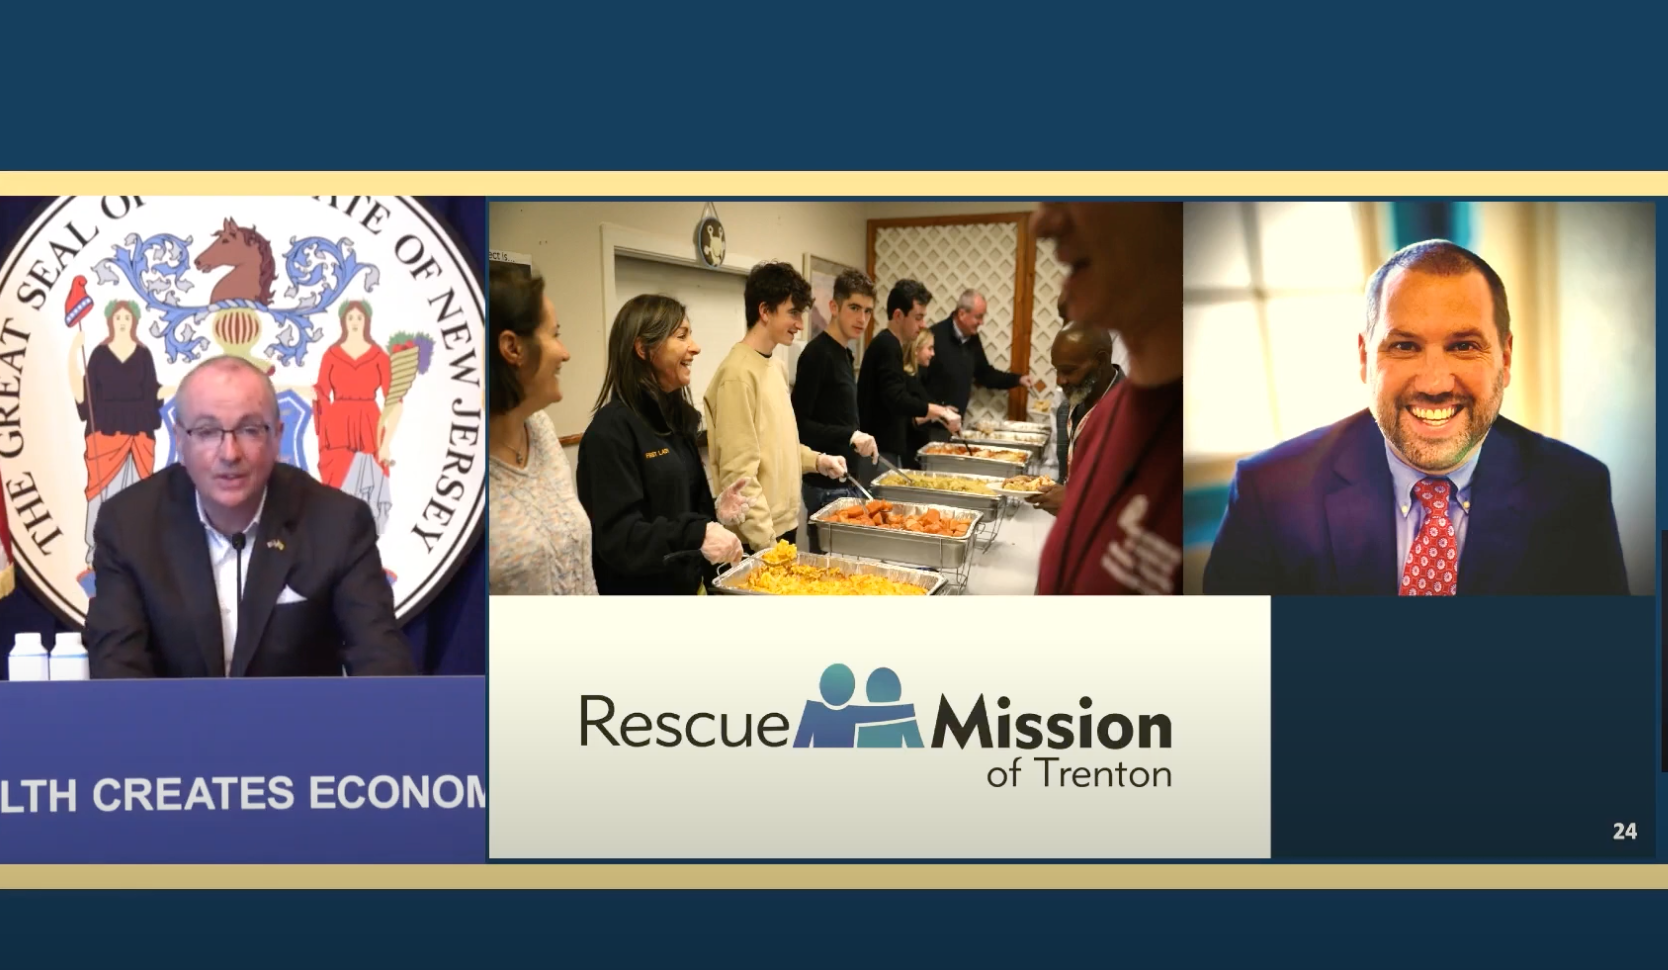 Governor Murphy speaks about the Mission's work